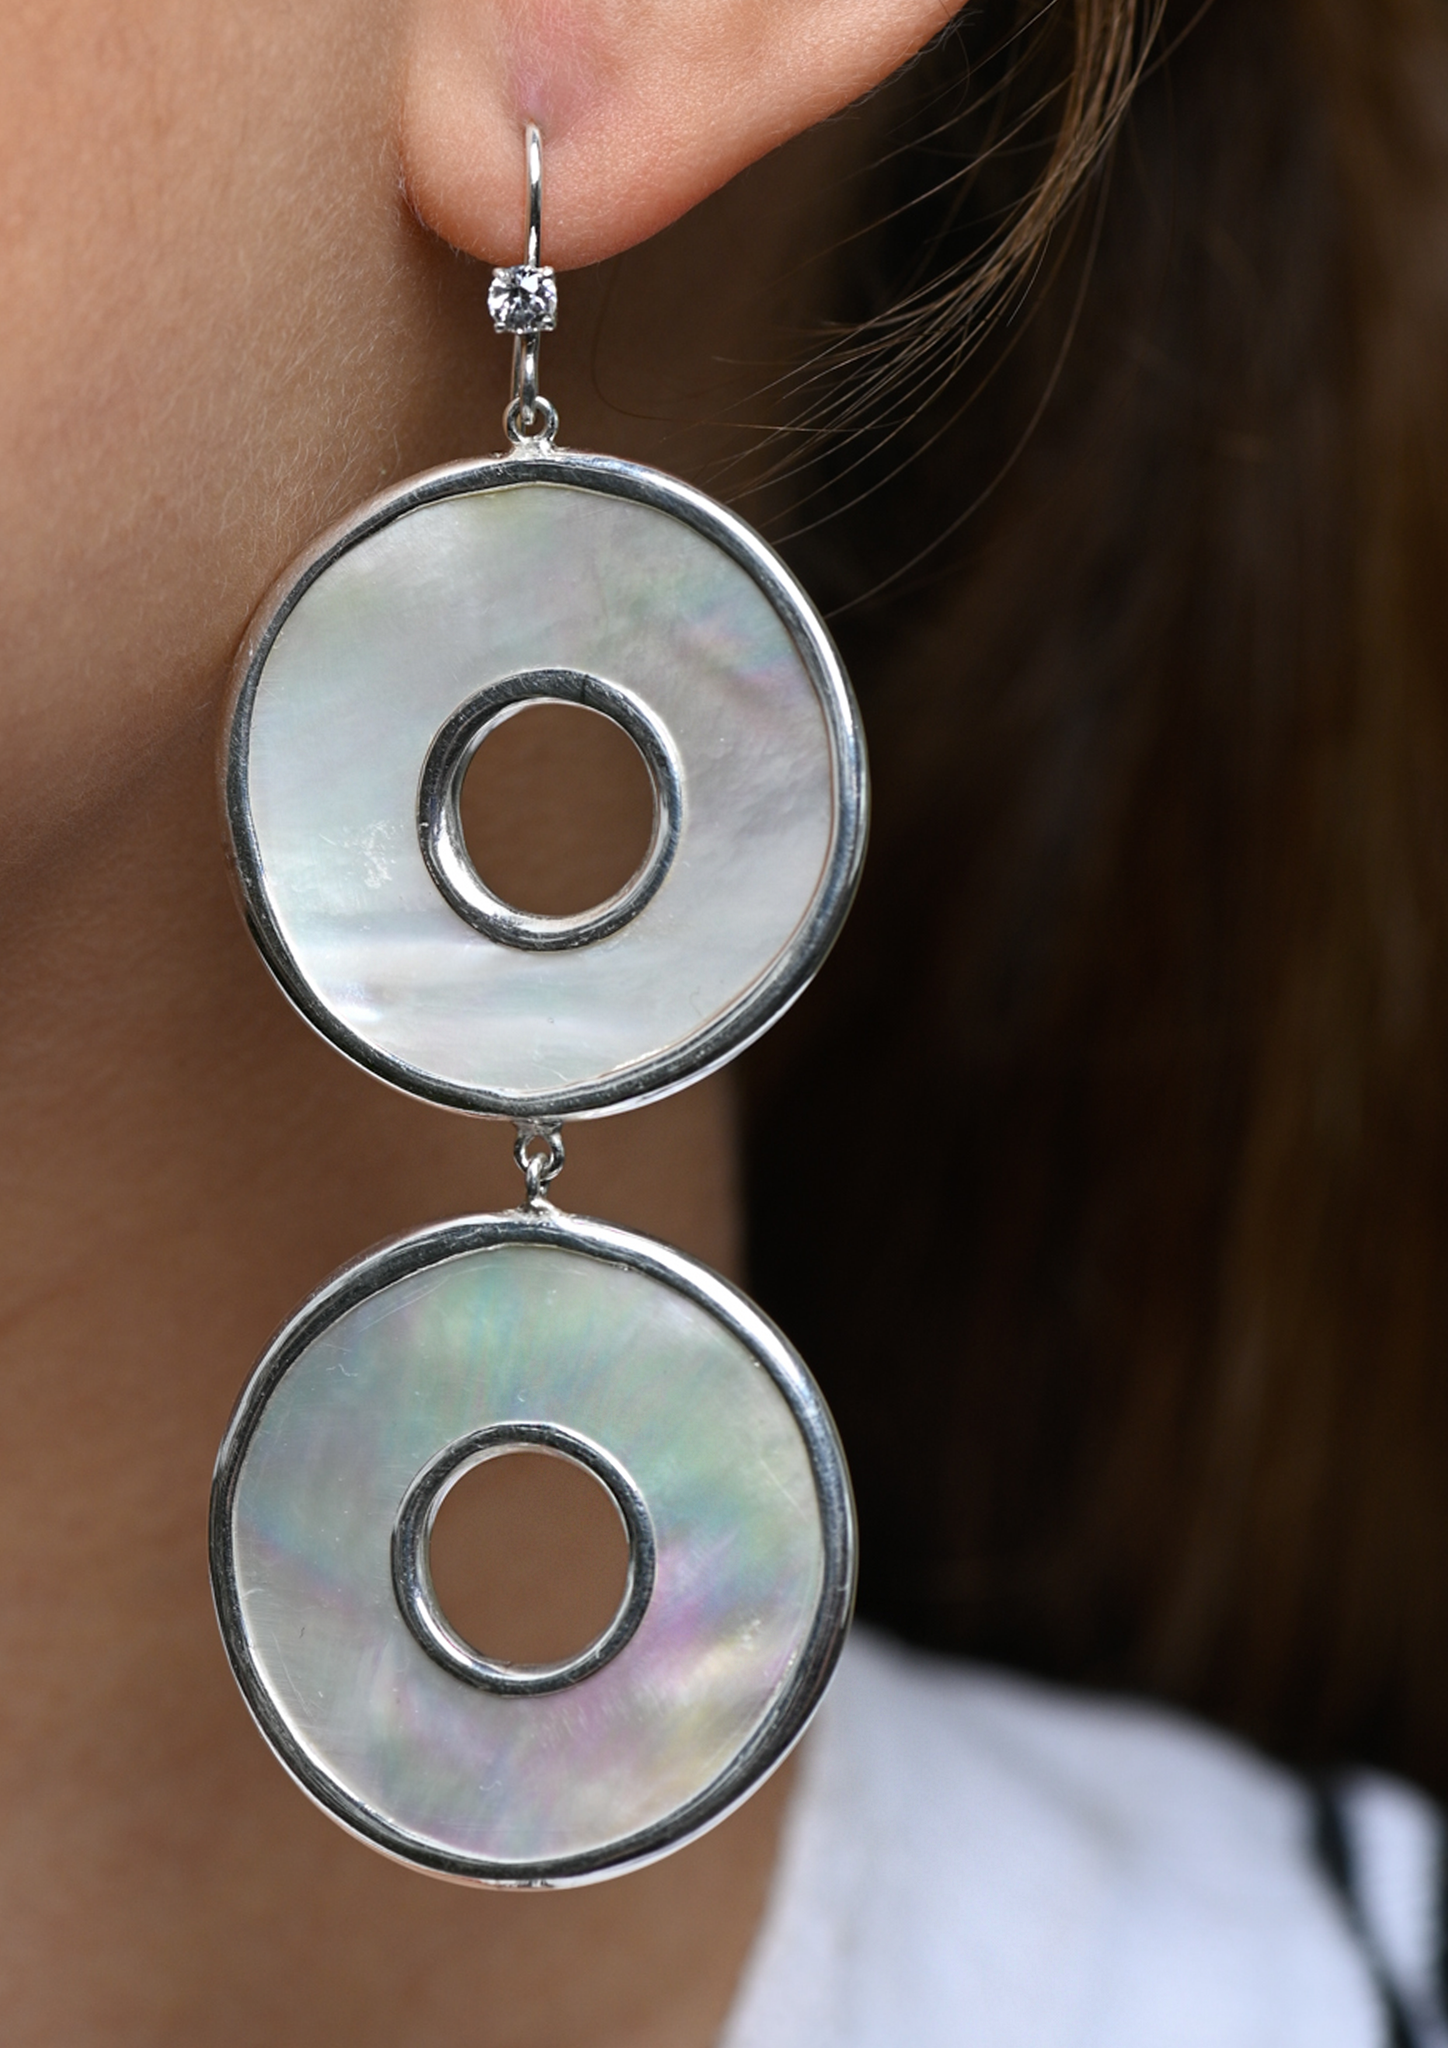 Mother of pearl discs set 950 sterling silver, with a diamond-cut Ceylonese white sapphire on the S hook.